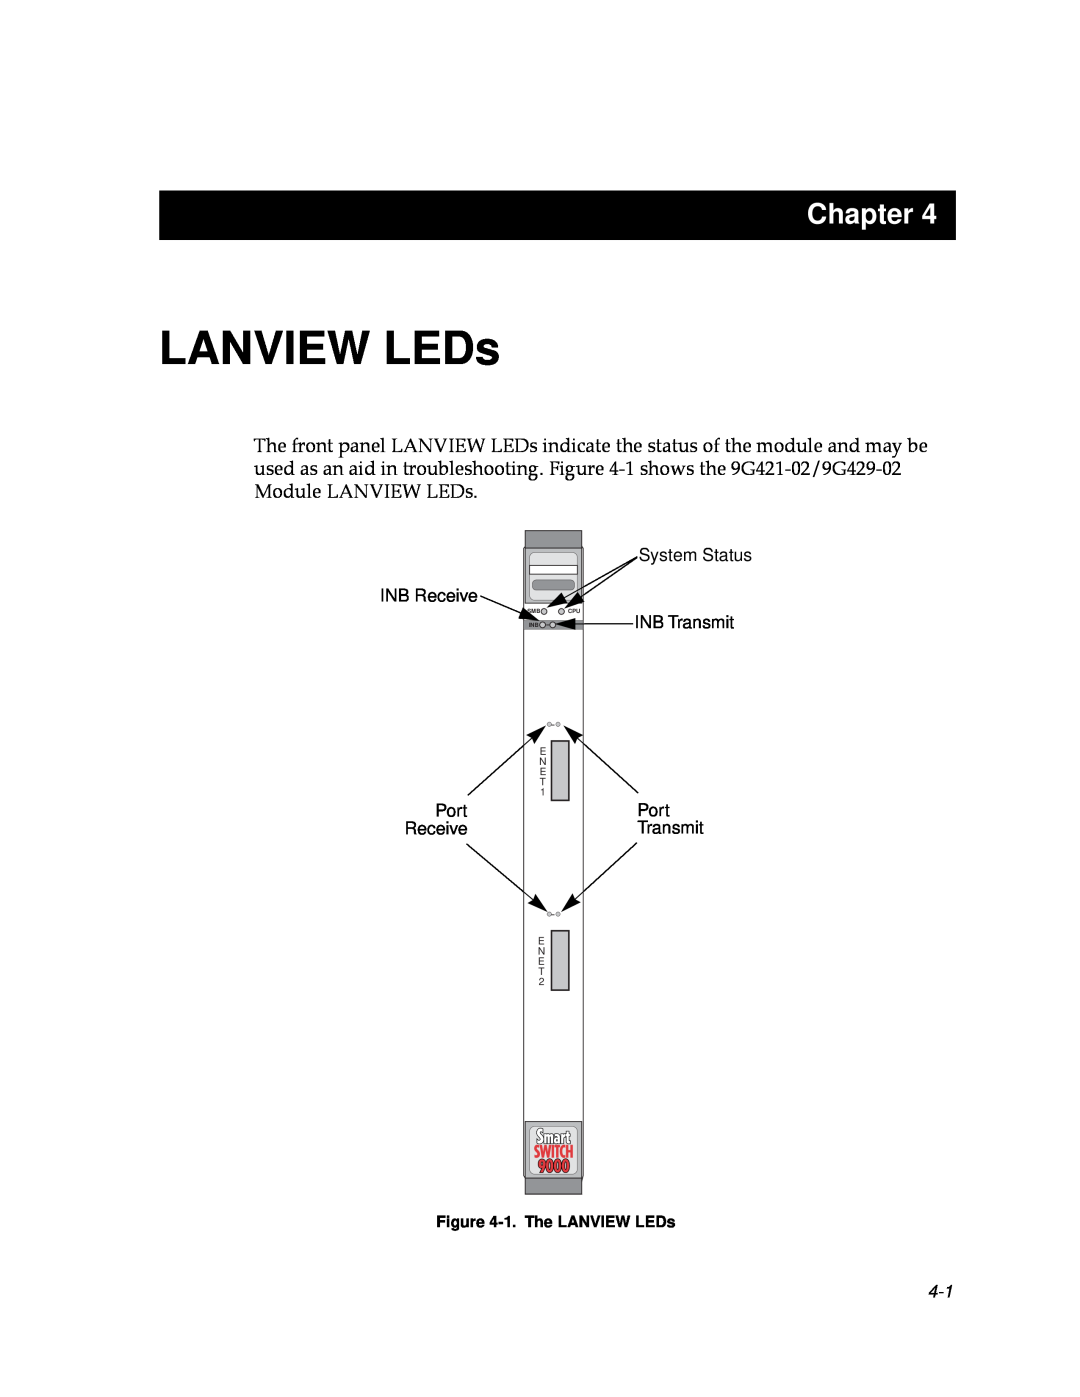 Cabletron Systems 9000 manual Chapter, INB Receive, System Status INB Transmit, Port, 1. The LANVIEW LEDs, E N E T 